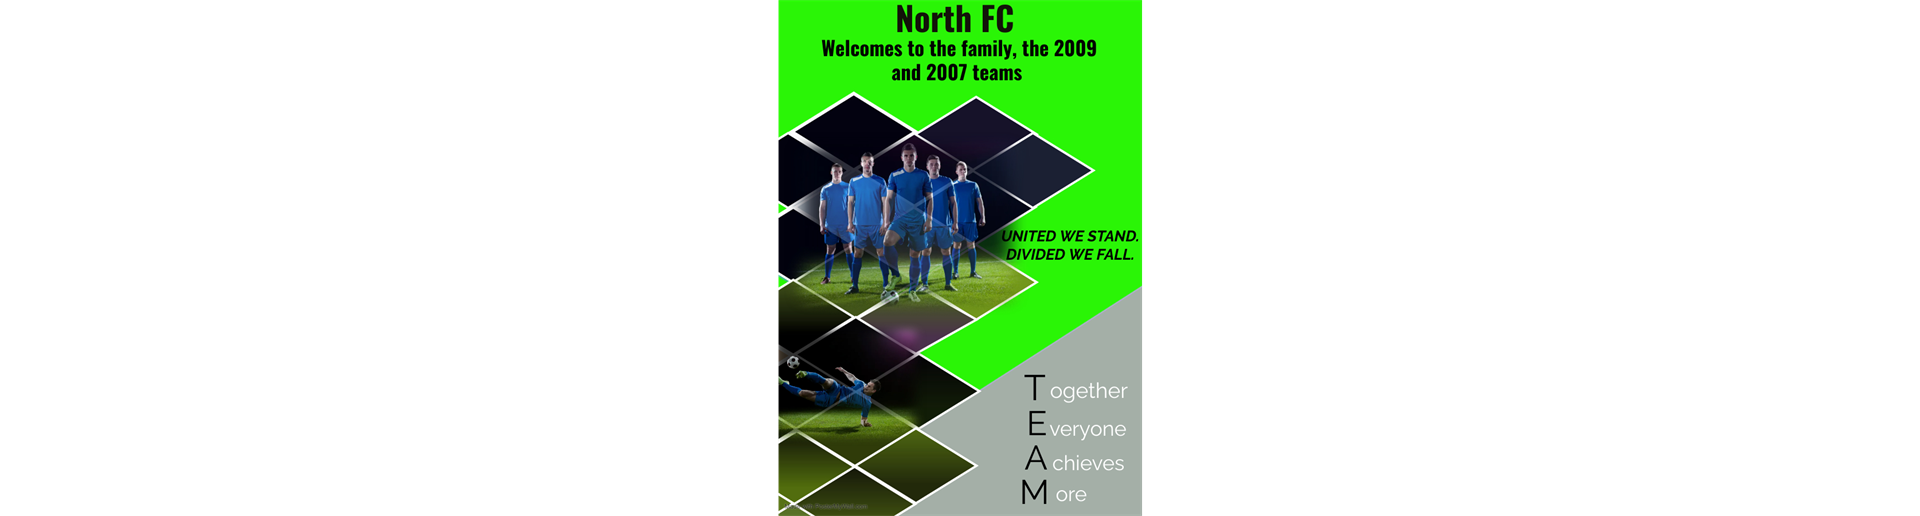 NORTH FC adds 2009 and 2007 teams for 22/23 season